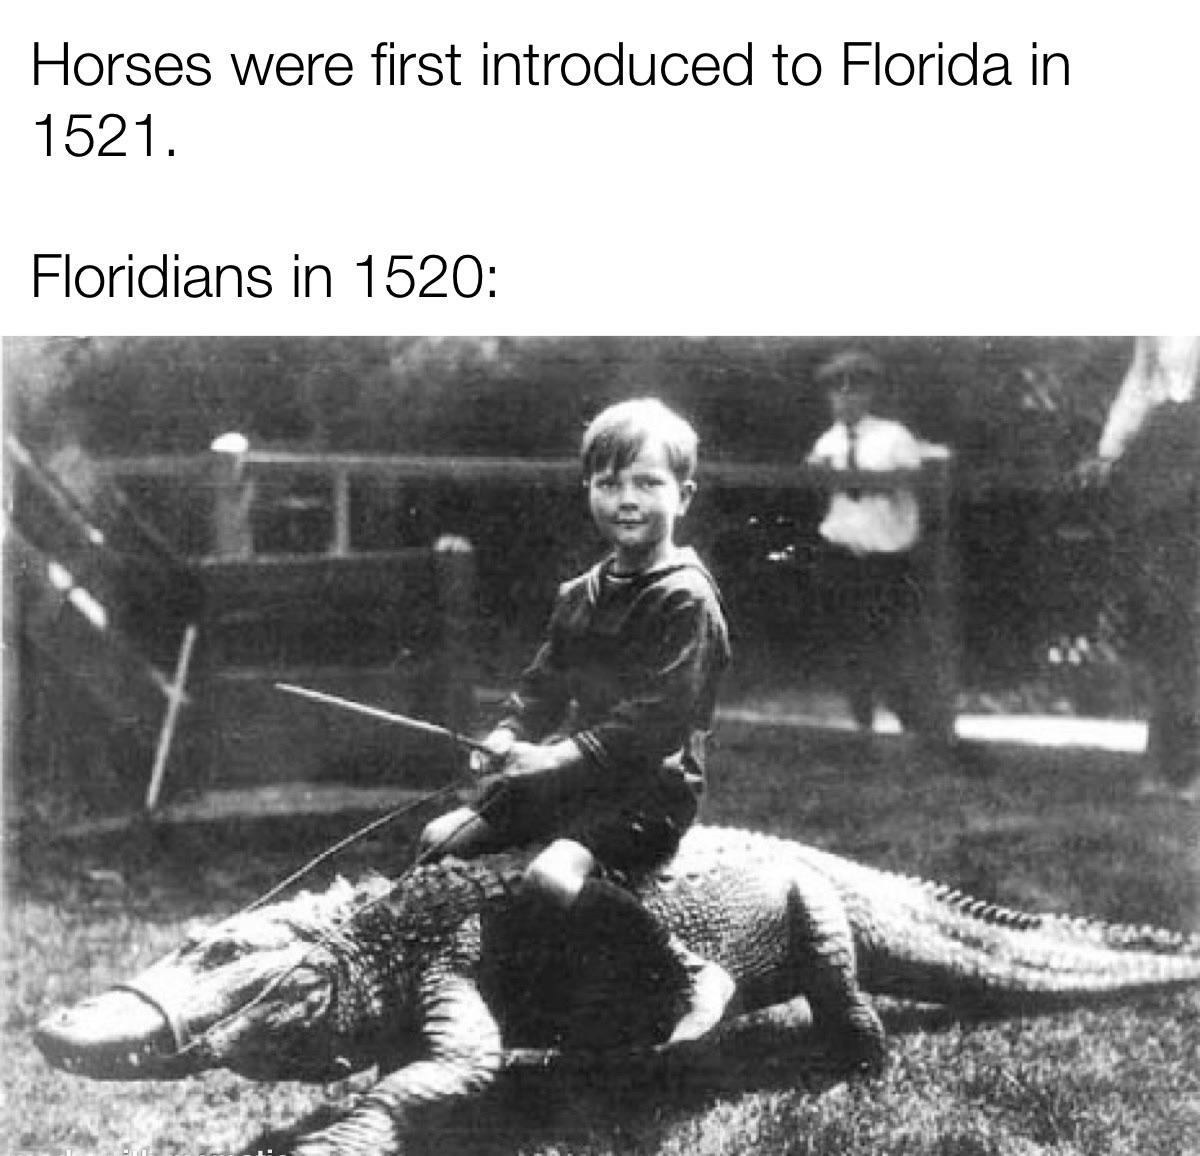 sonia dada albums - Horses were first introduced to Florida in 1521. Floridians in 1520